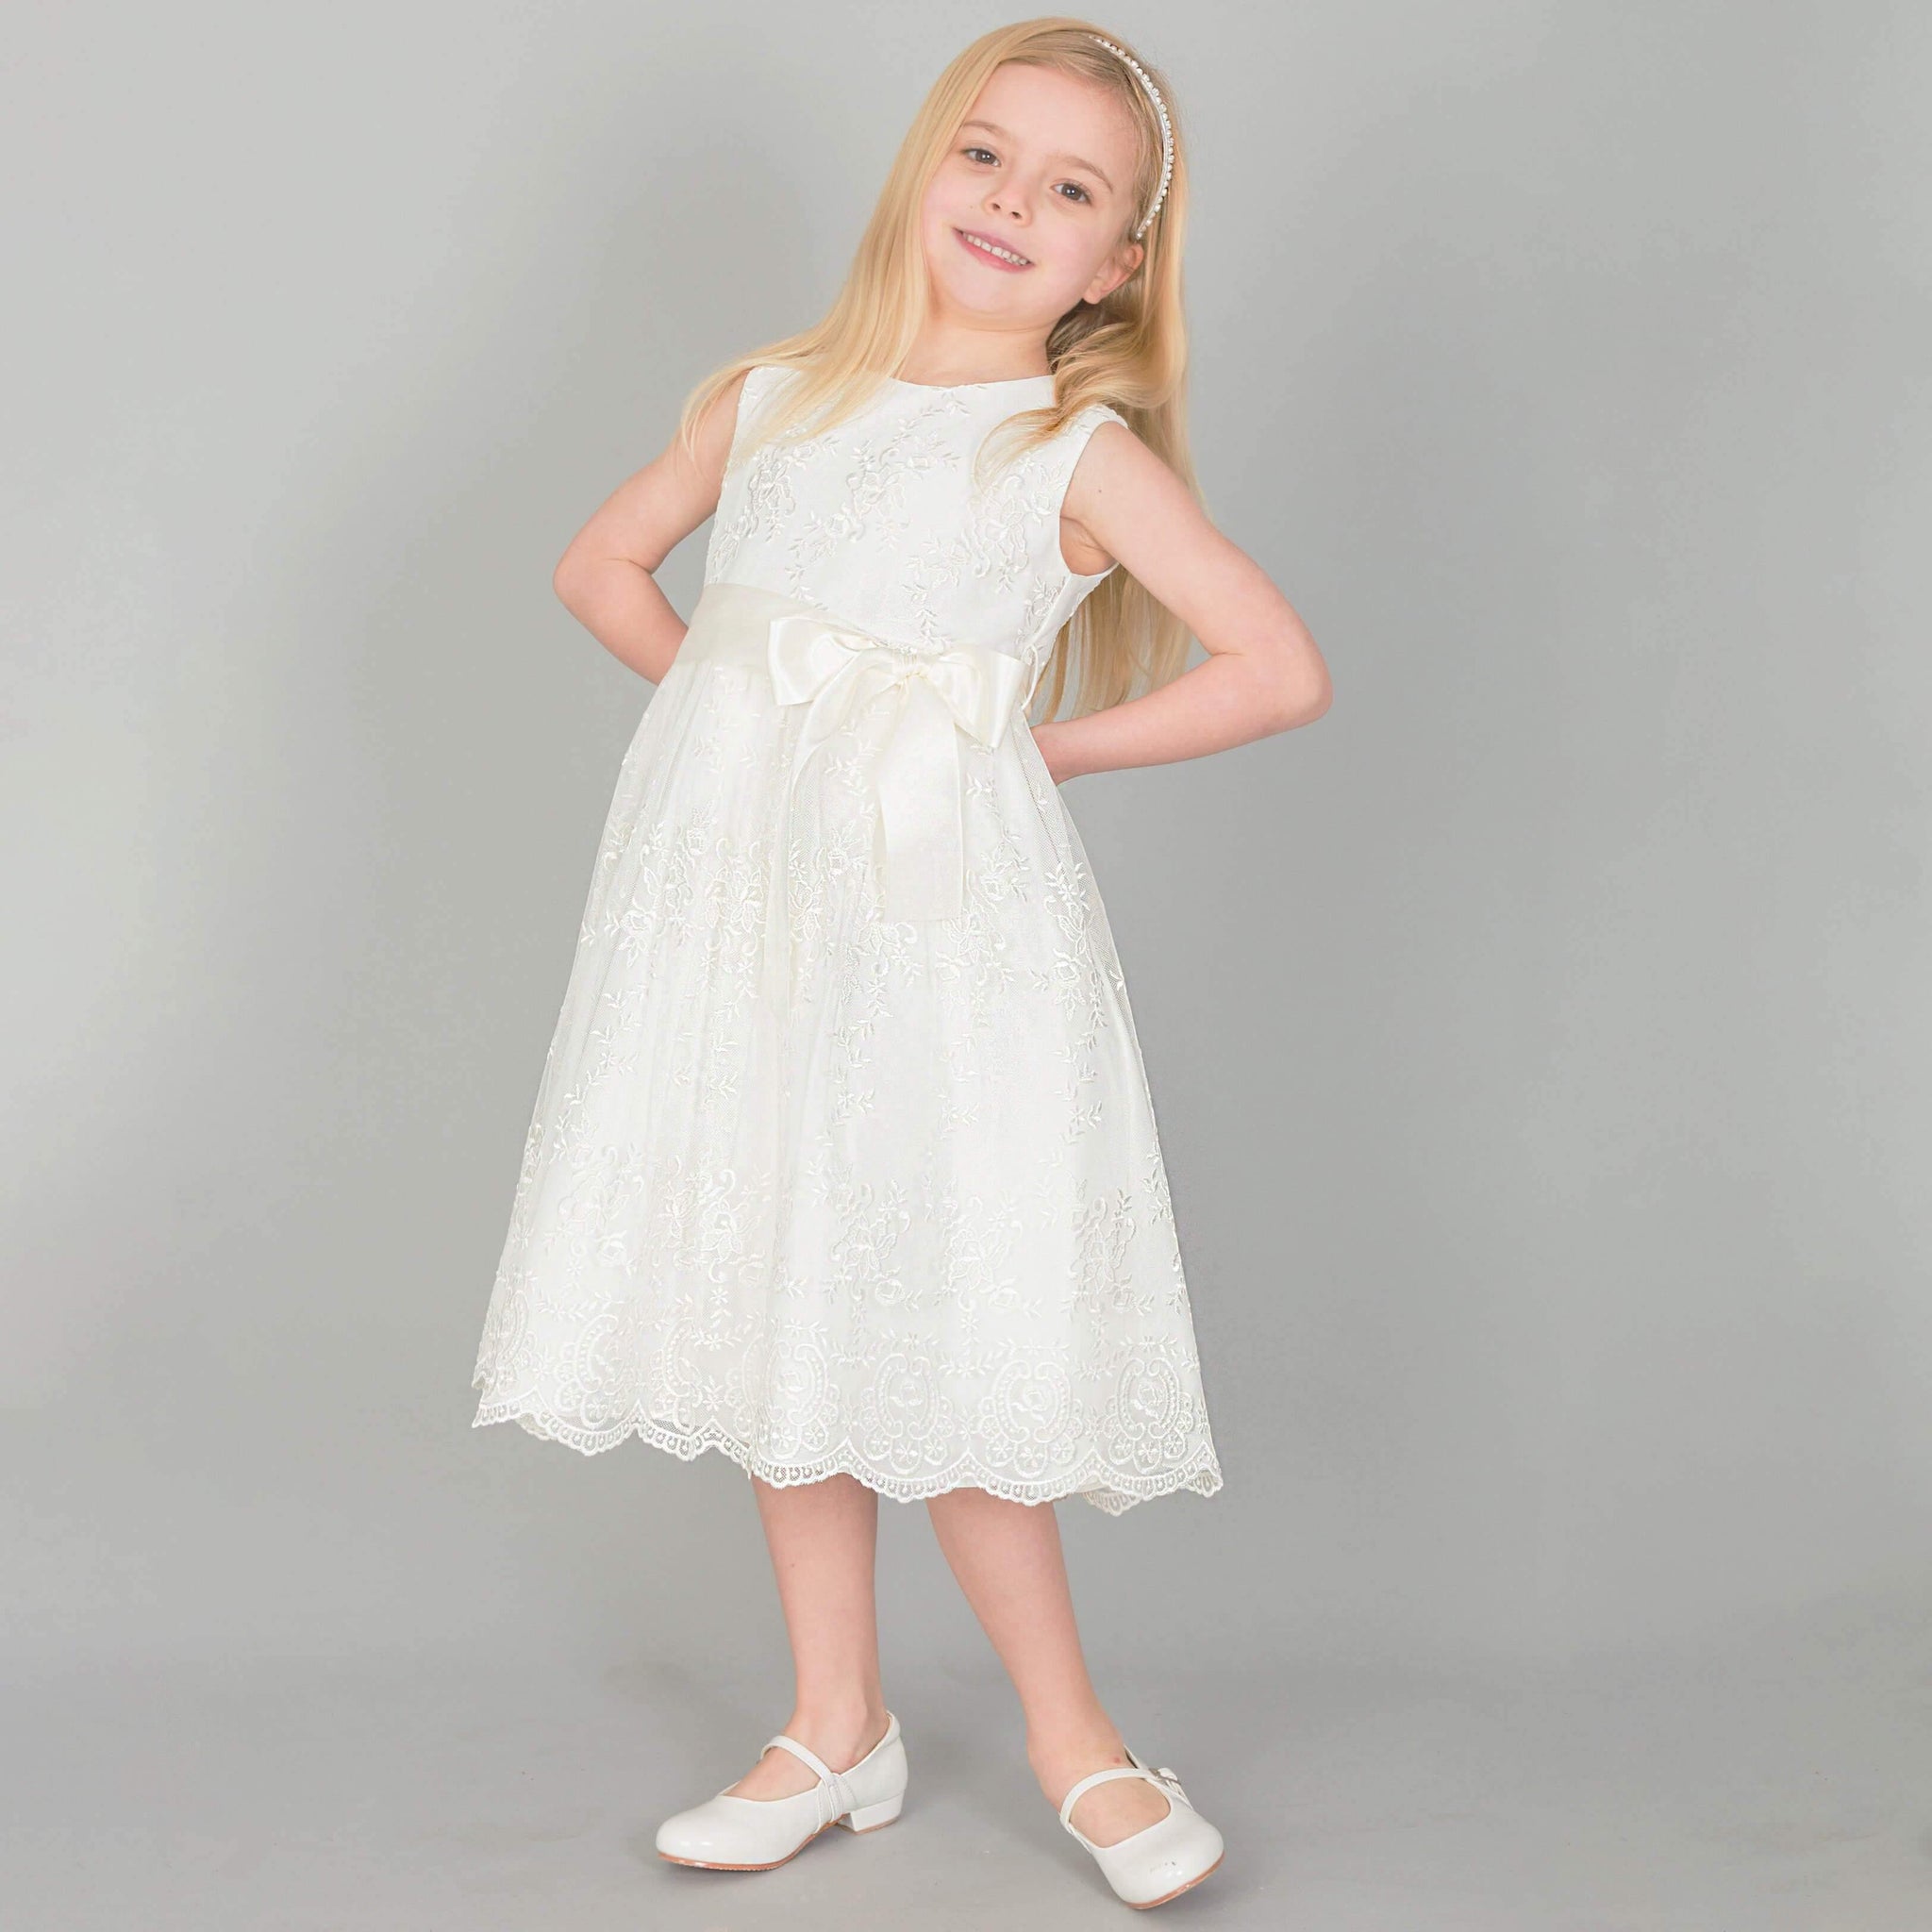 Girl in ivory party dress